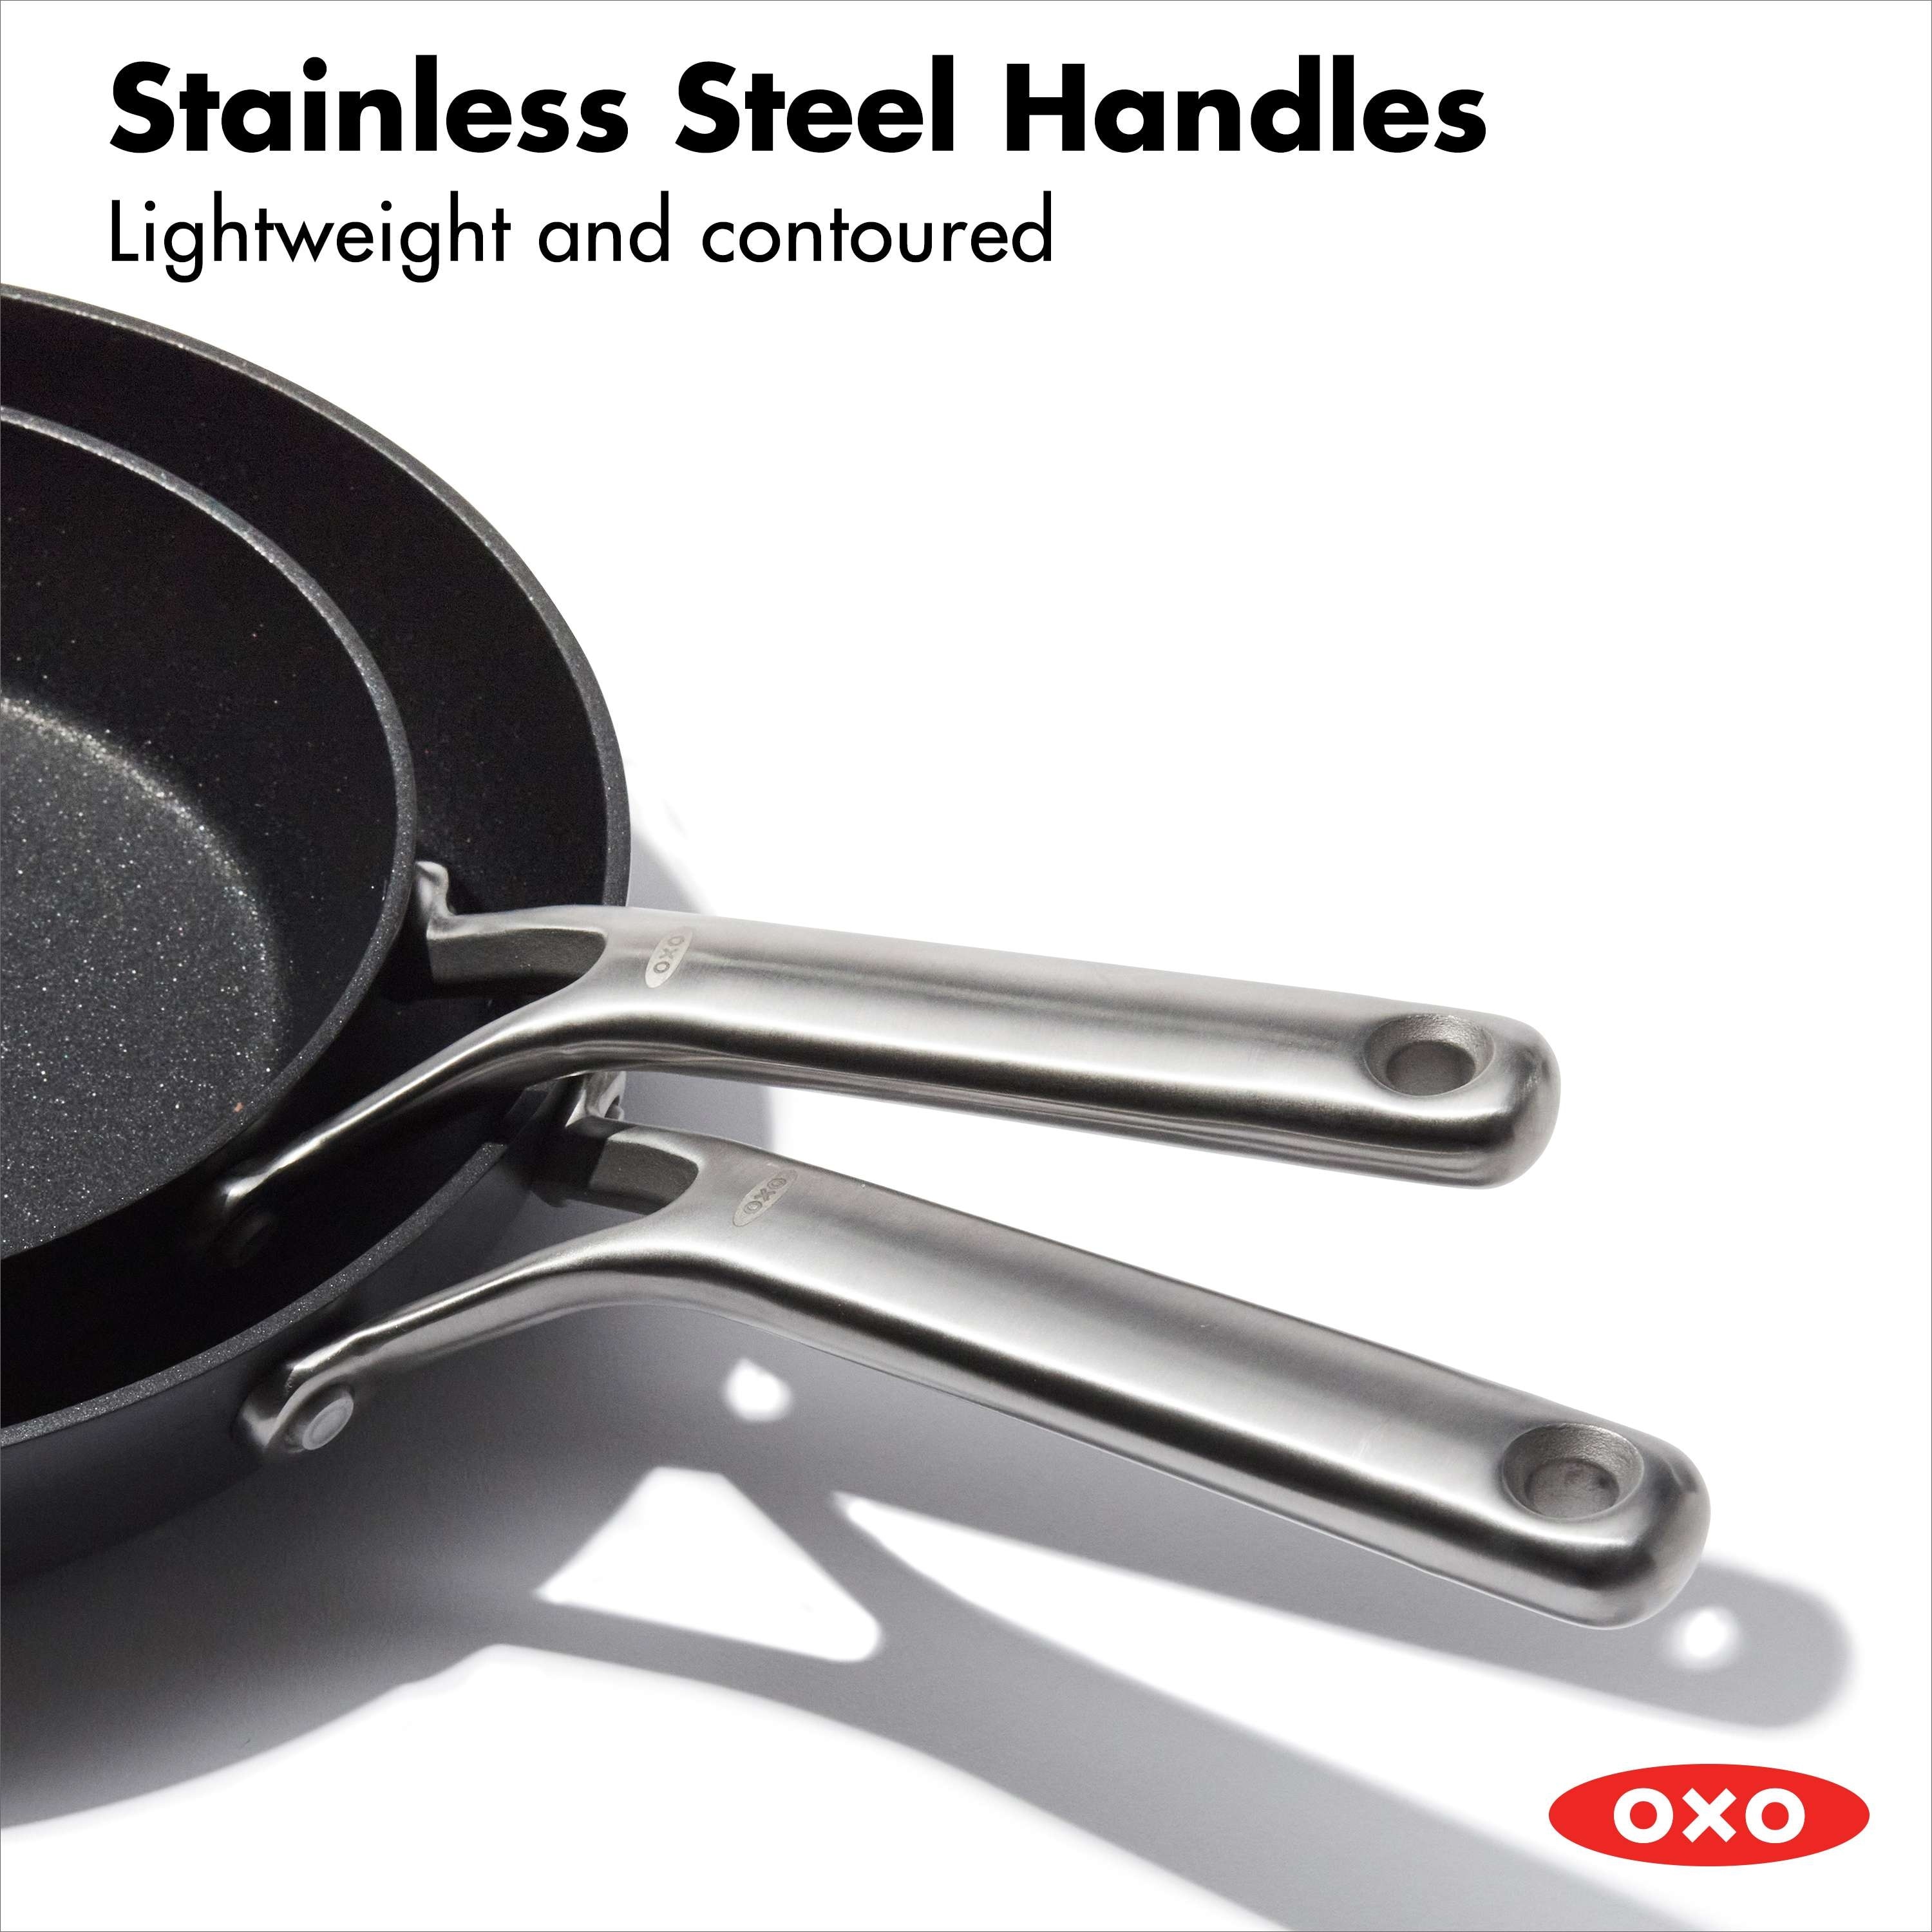 OXO Hard Anodized Nonstick Cookware, 2 Piece Frypan set, 8 and 10